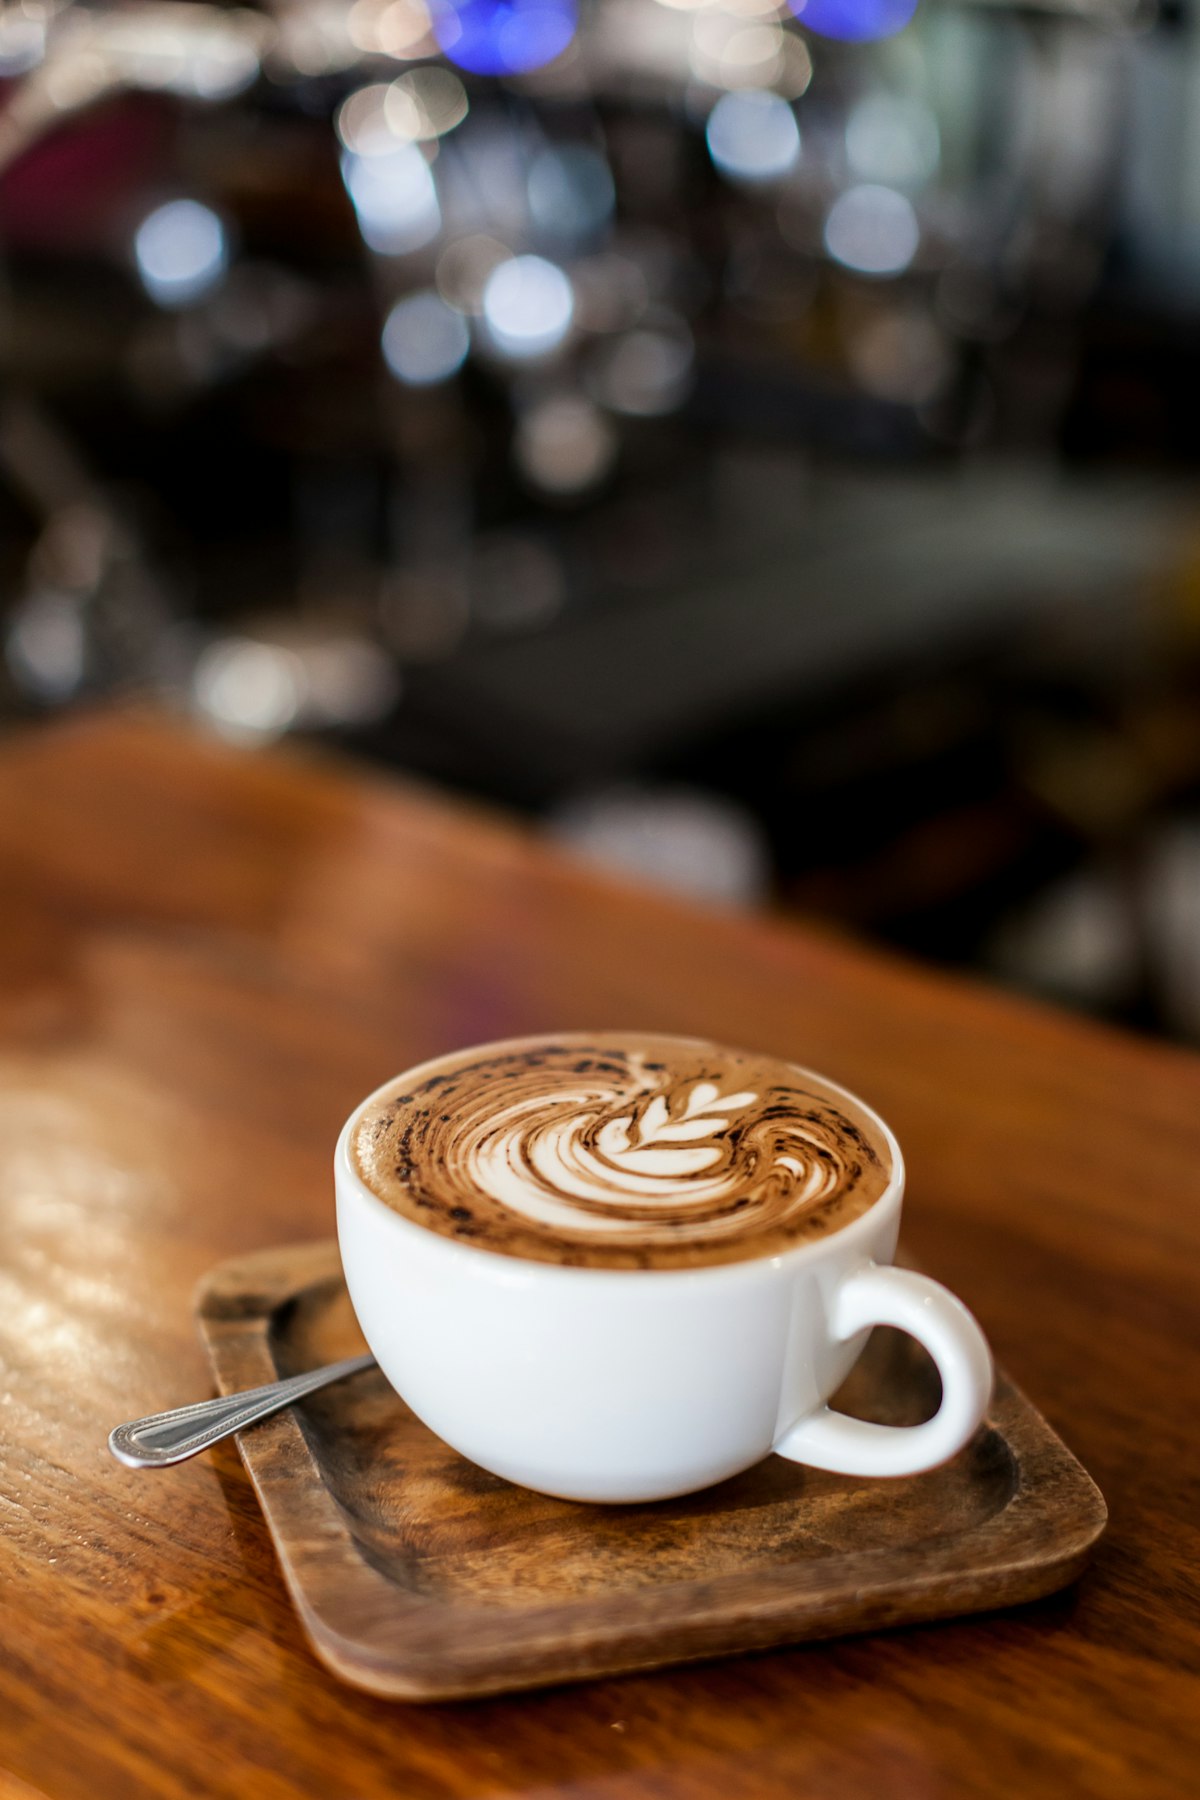 Cup of coffee latte on wood bar. ; Shutterstock ID 767149903